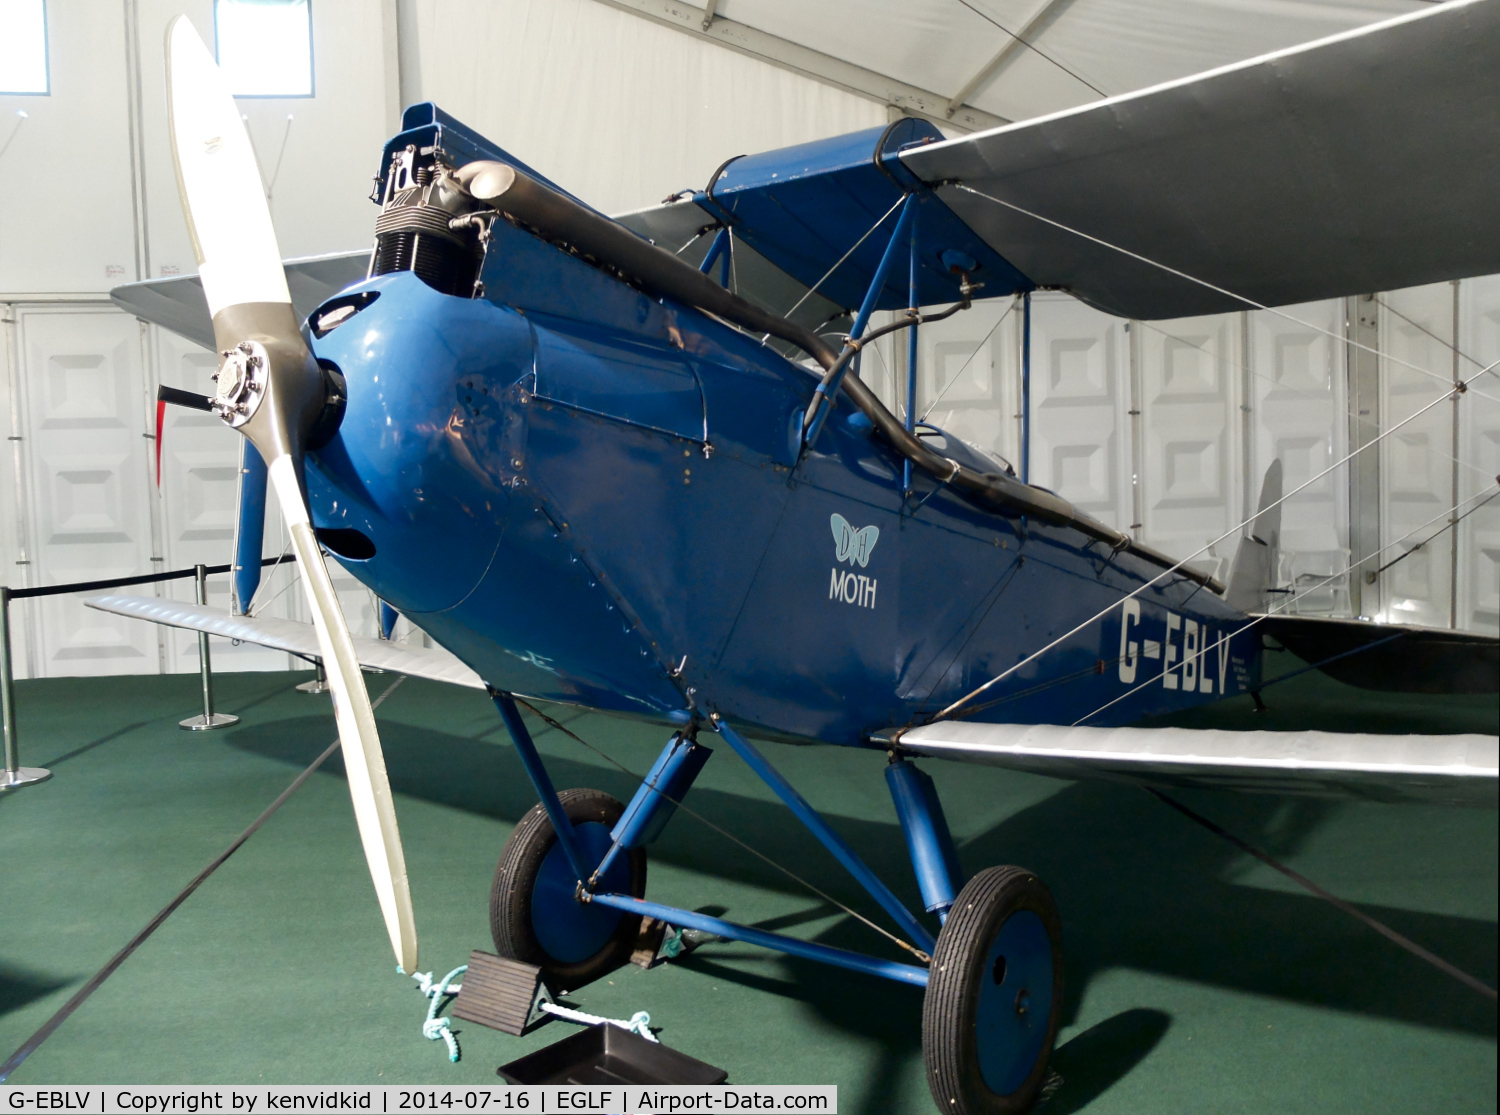 G-EBLV, 1925 De Havilland DH-60 Moth C/N 188, On static display in a tent at FIA 2014, the oldest airworthy Moth.